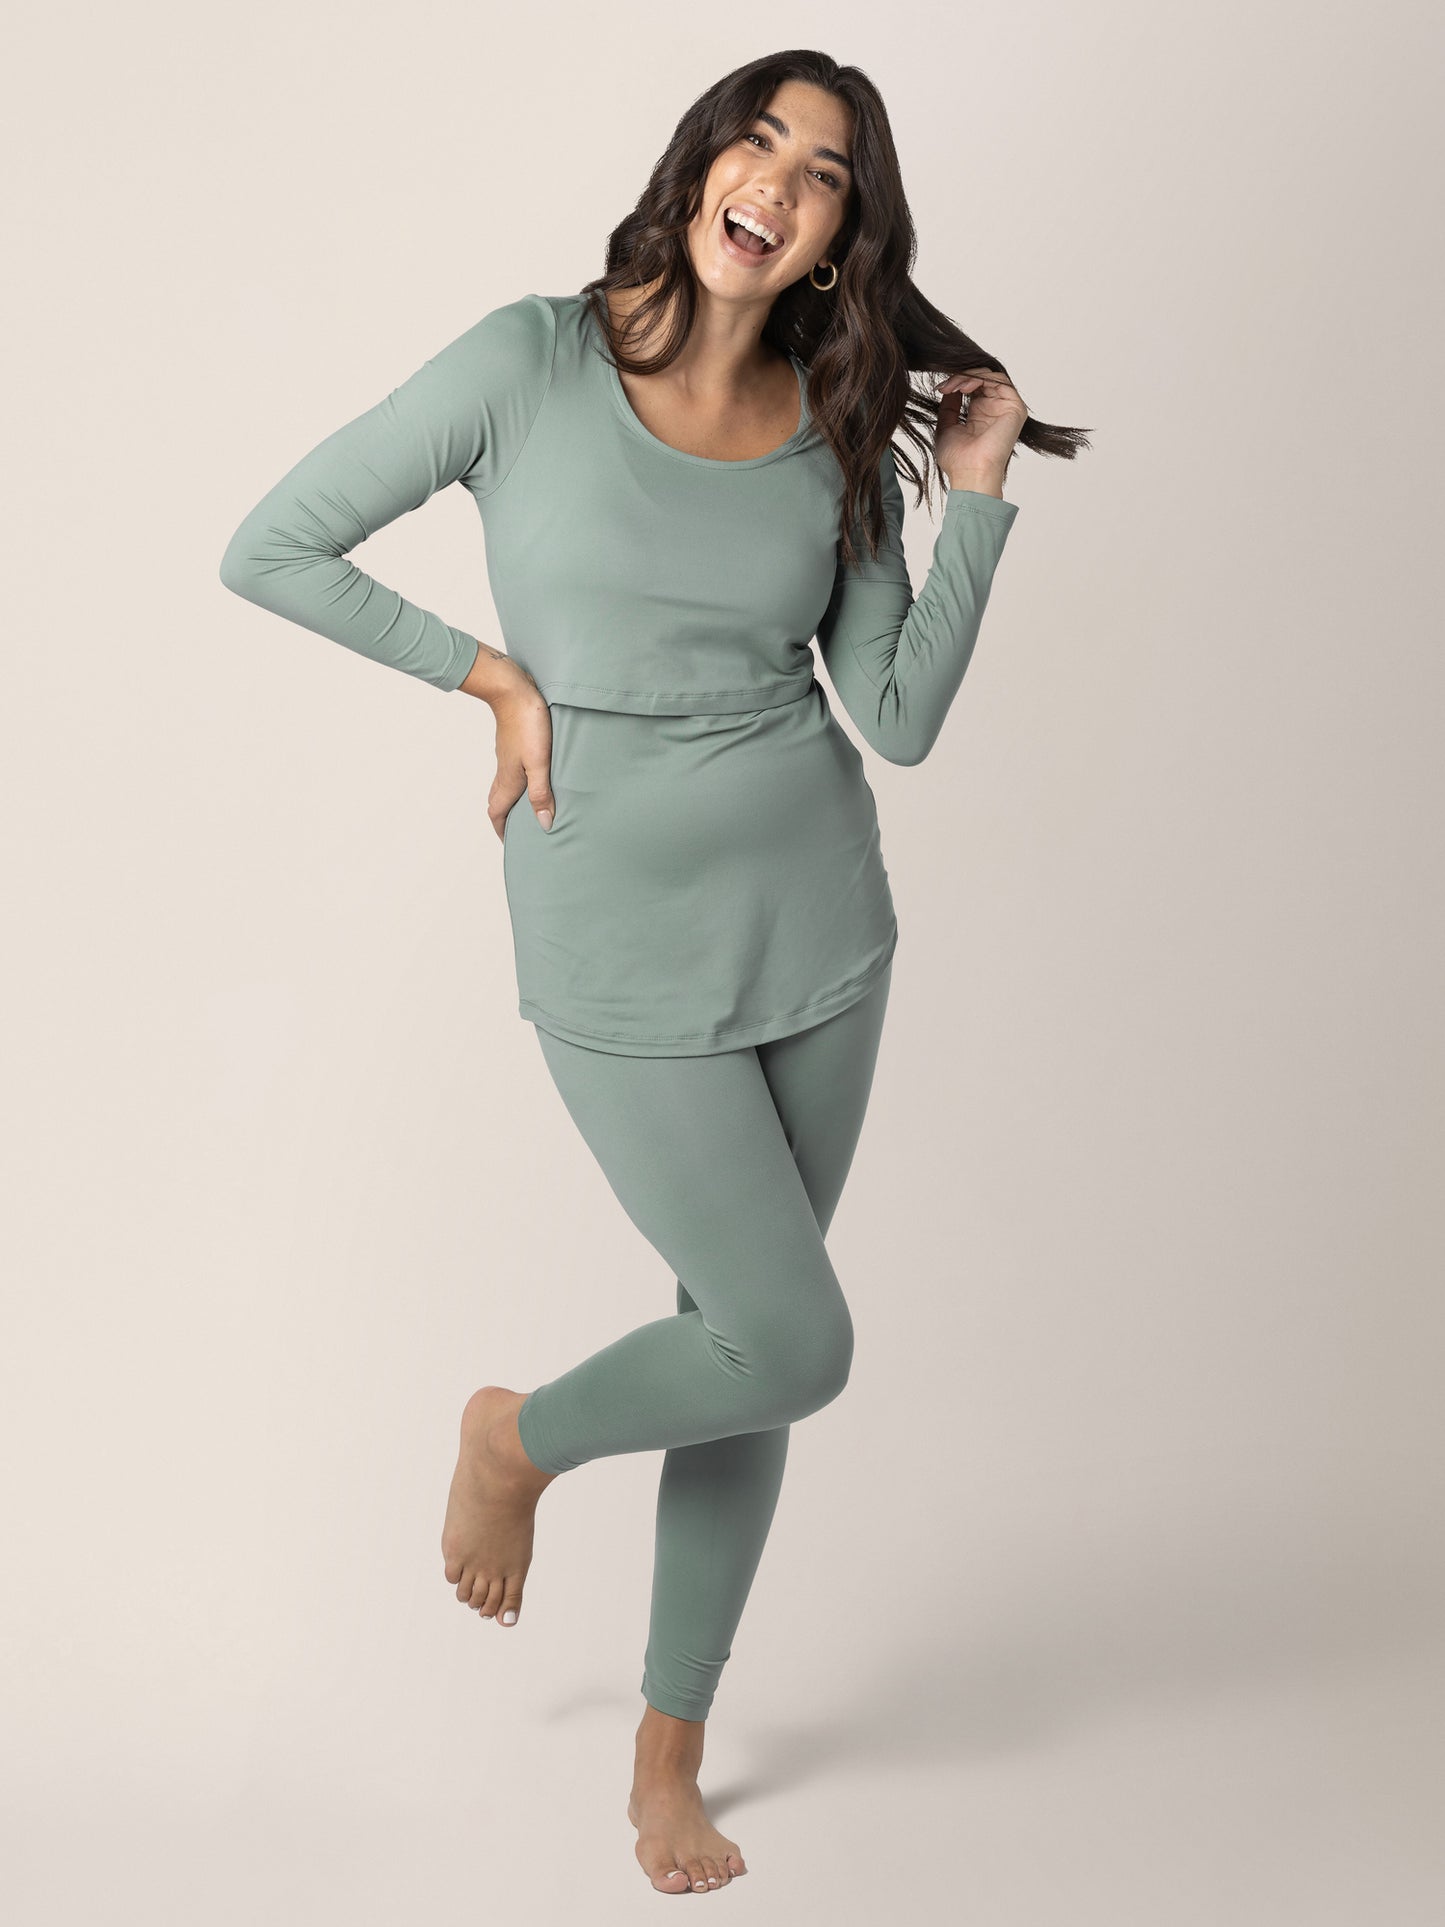 Model standing on one leg playing with her hair while wearing the Jane Nursing Pajama Set in Sage @model_info:Alexis is 5'10" and wearing a Medium.